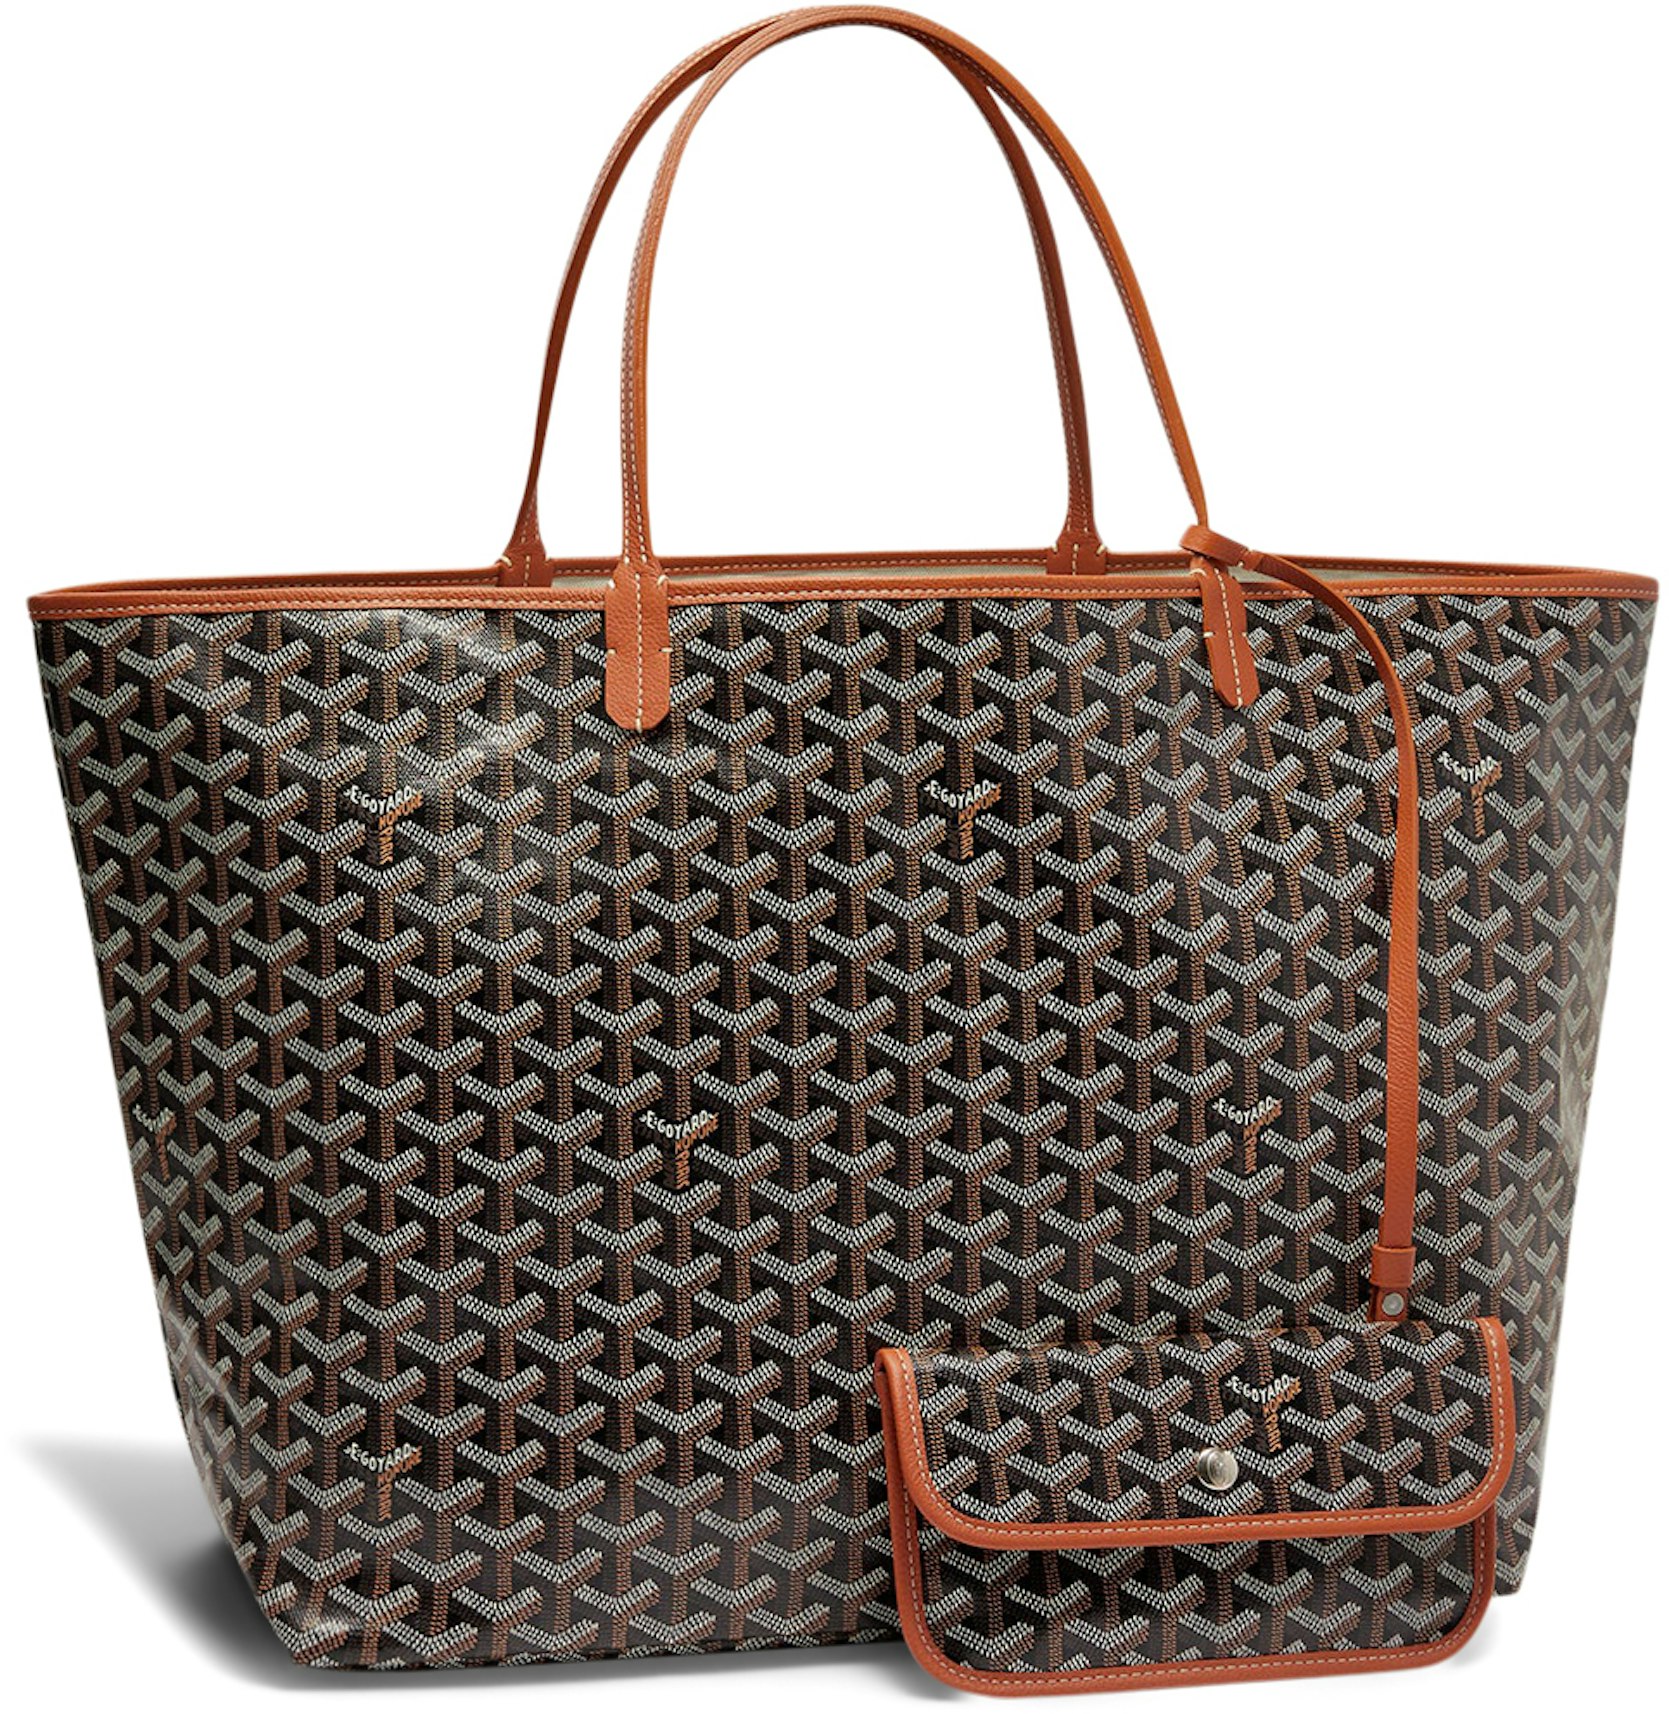 Buy Goyard Tote Wallets and More - StockX